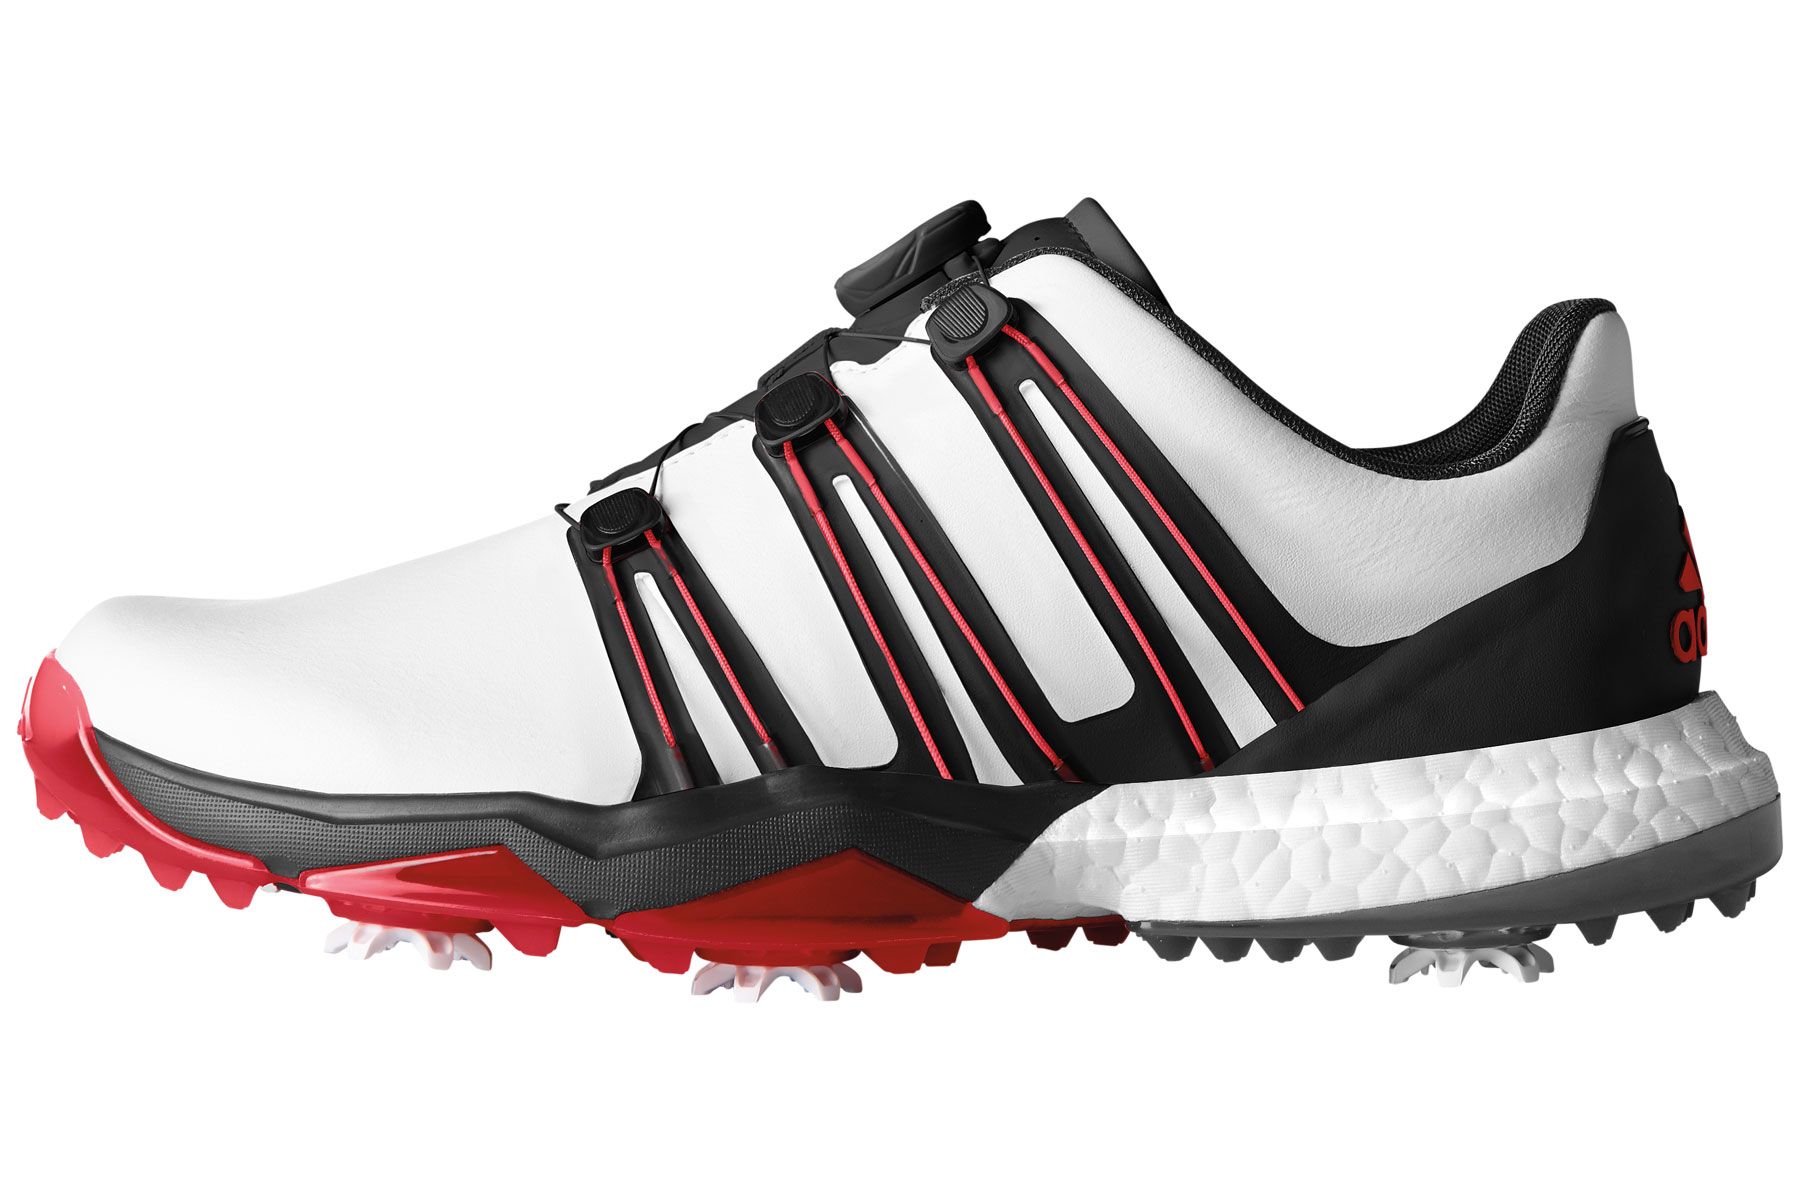 adidas Golf Powerband BOA Boost Shoes from american golf